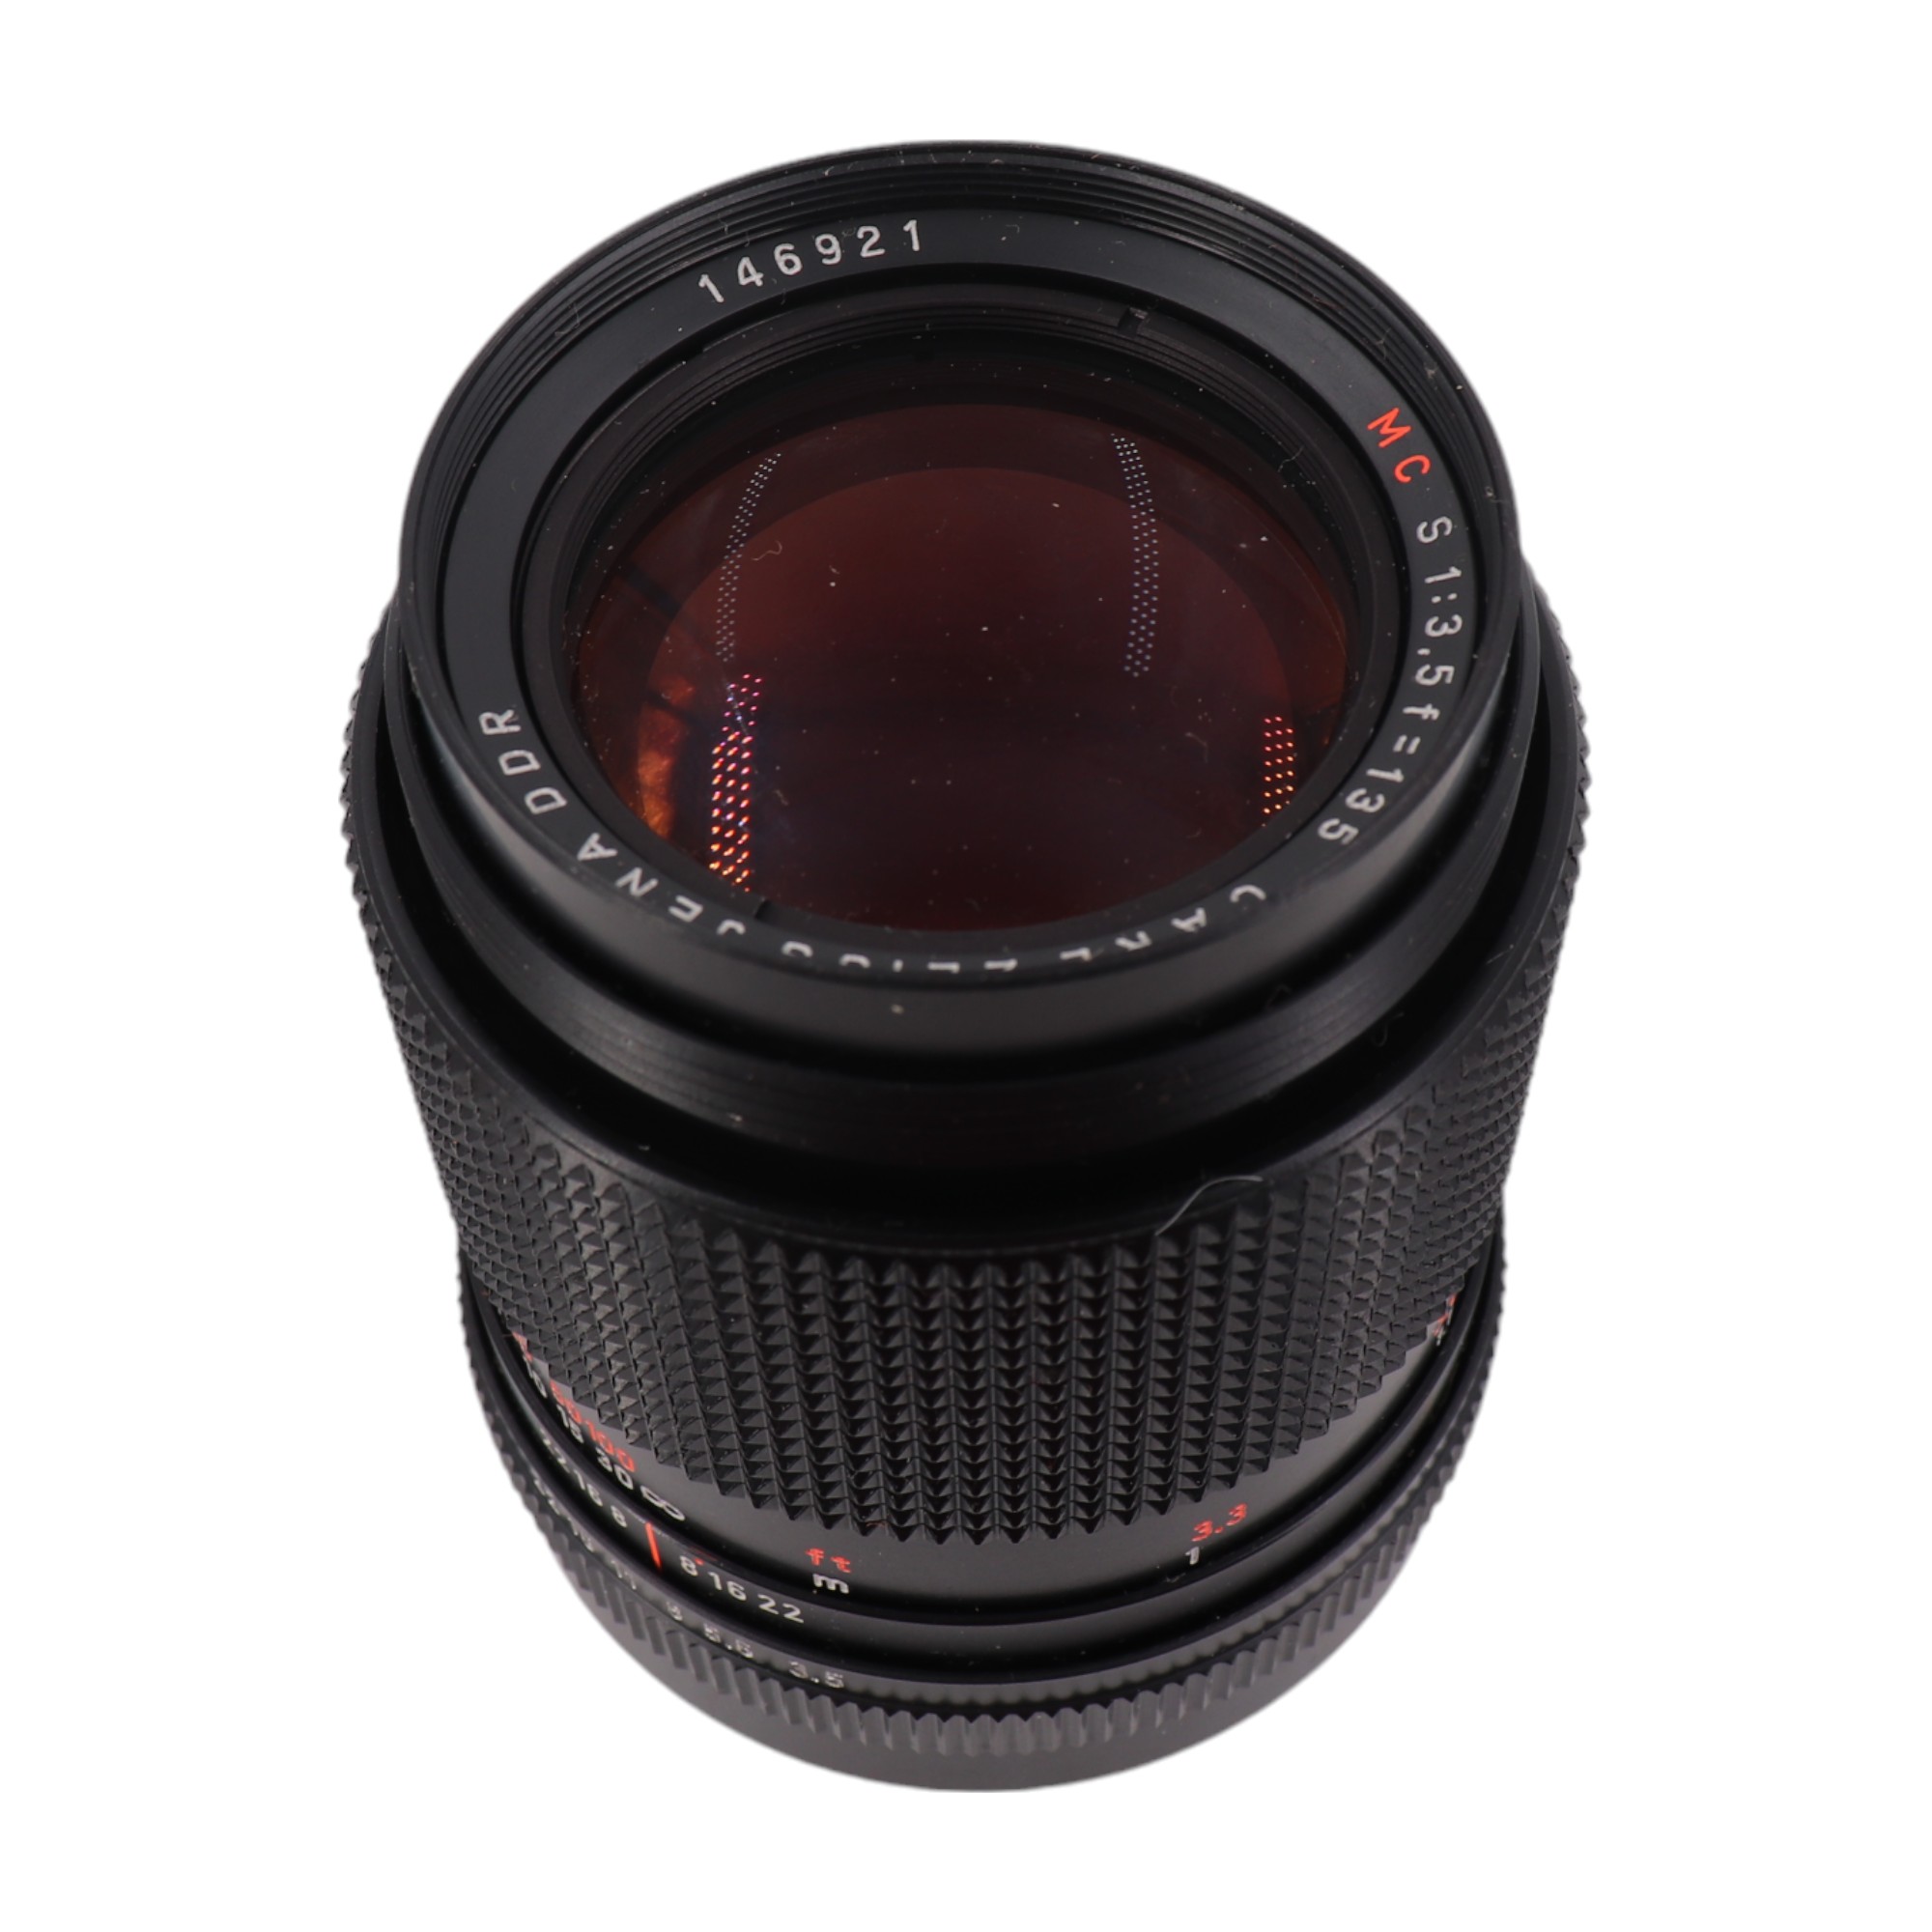 A Carl Zeiss MC S 1:3,5 f=135 camera lens (146921) - Image 3 of 7